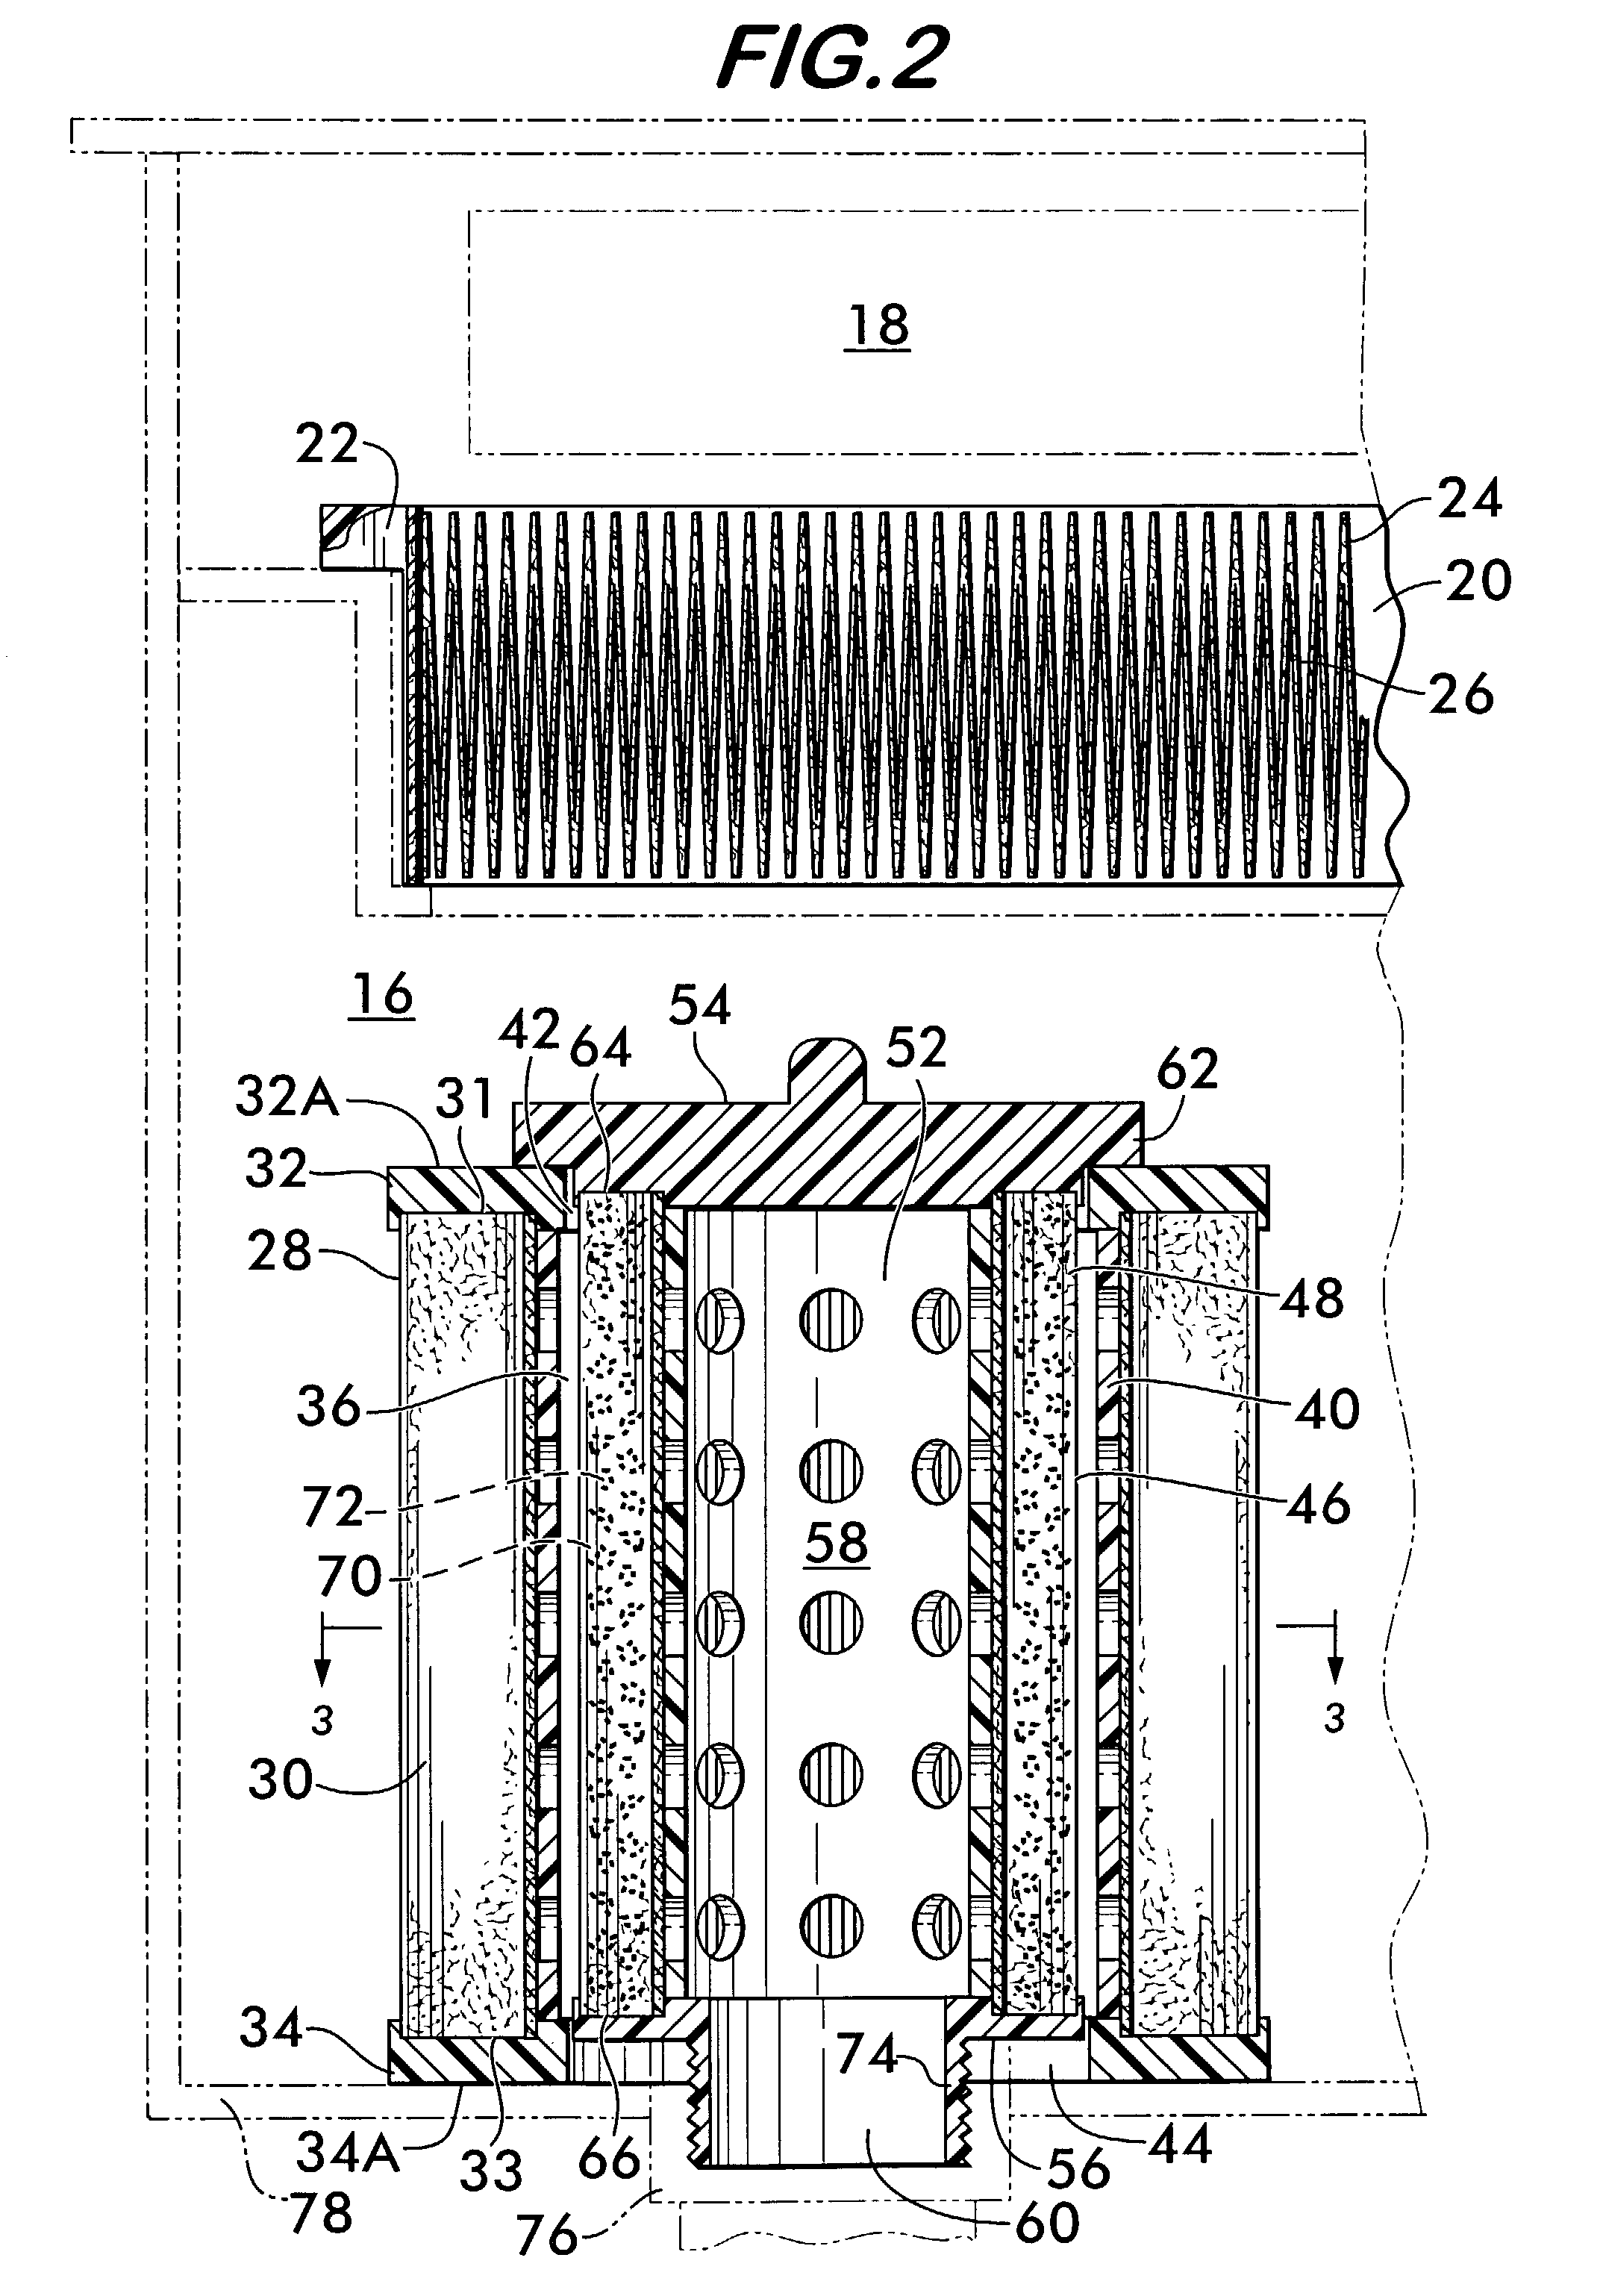 Fluid filter system with secondary flow path for augmented filtration